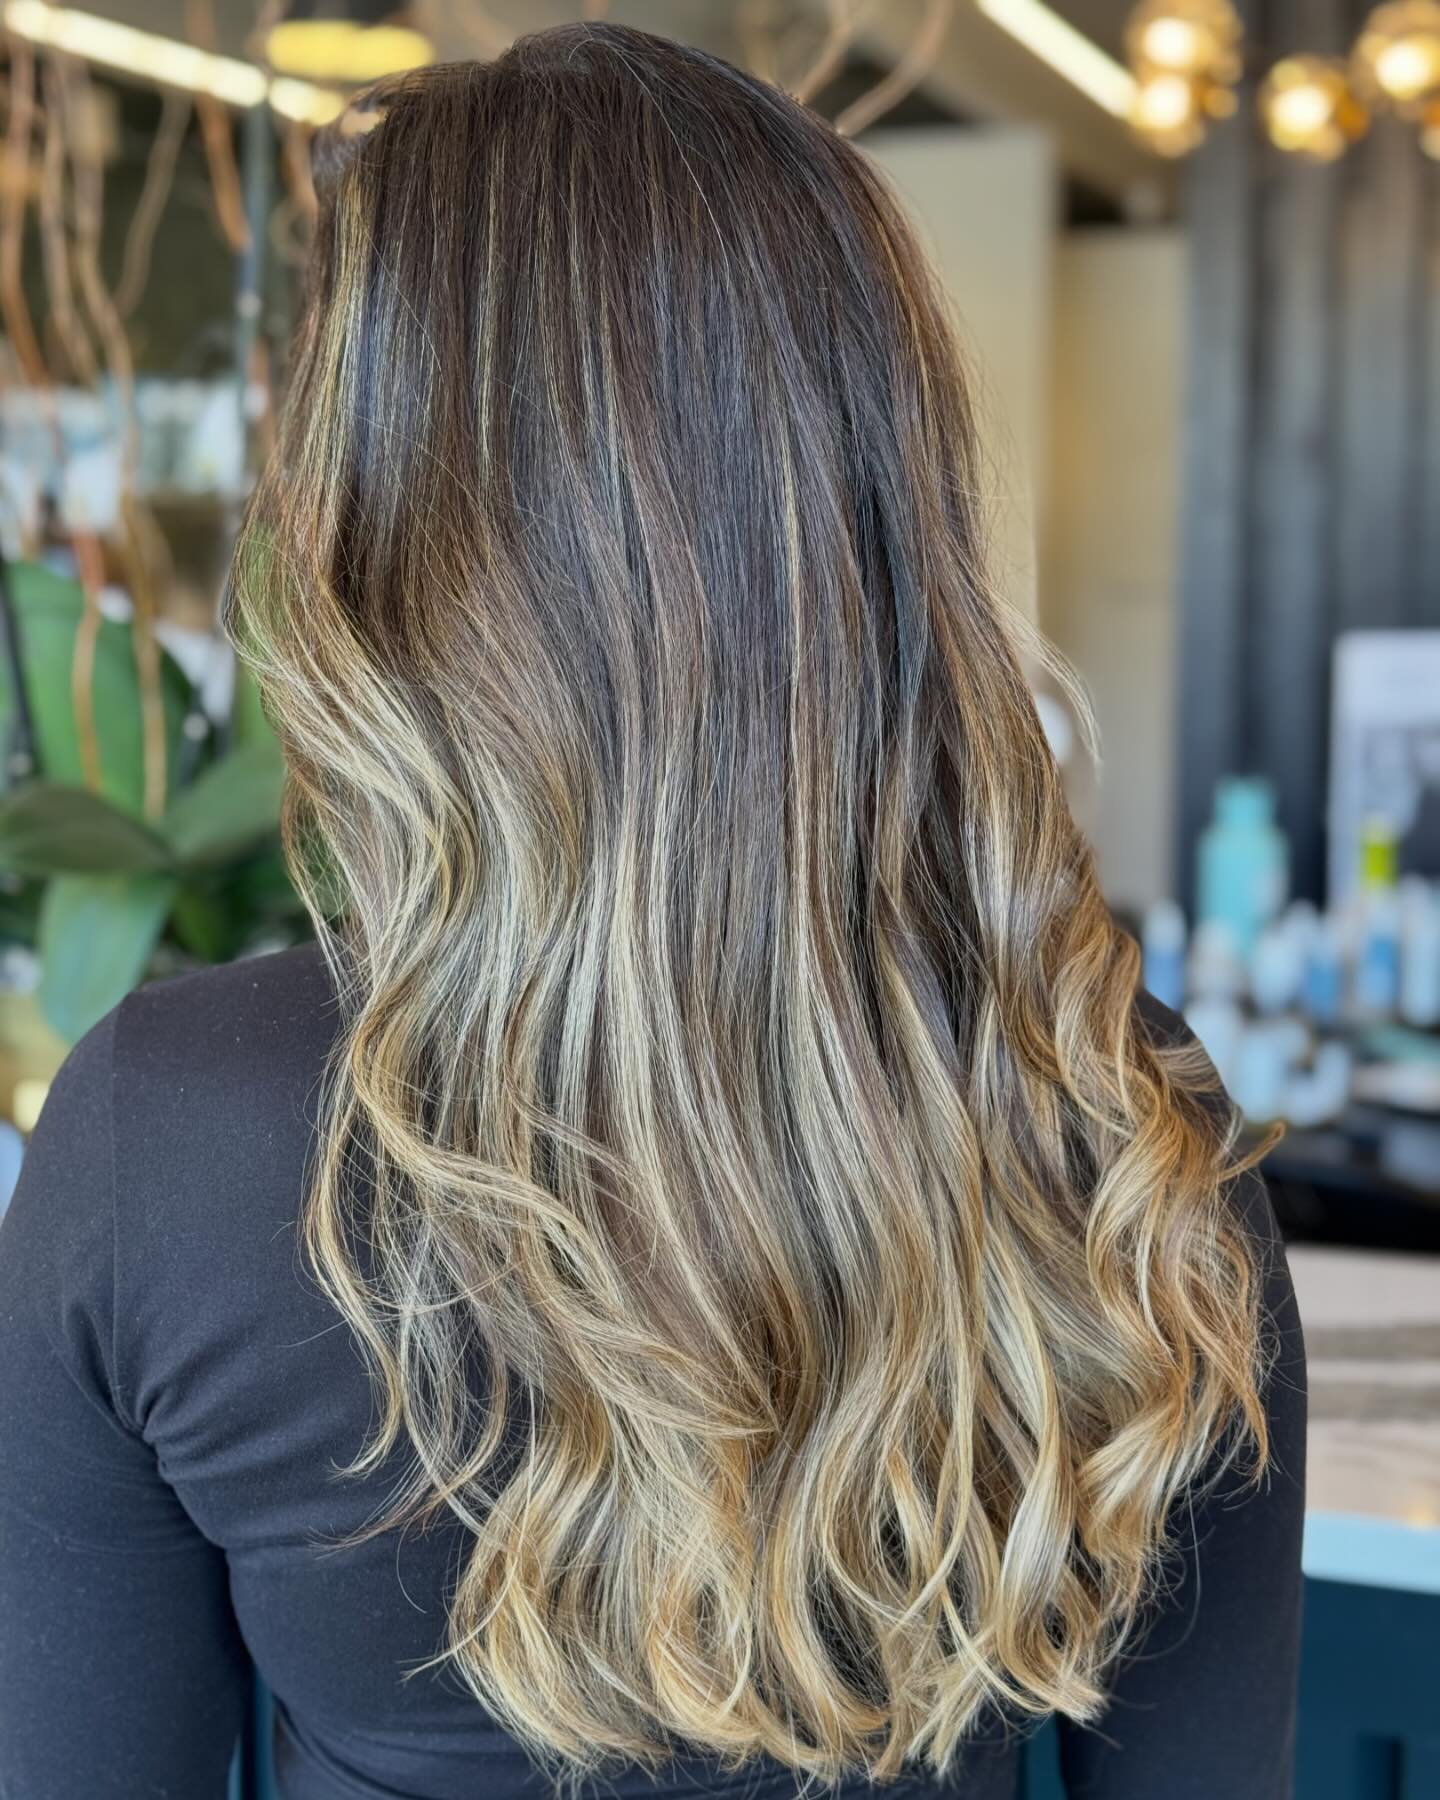 ✨ Feeling fabulous starts here! Check out this stunning transformation done by our incredible stylist, Shama! 💇&zwj;♀️✨ Ready to refresh your look? 
Book your complimentary consultation today and let&rsquo;s make magic happen! 🌟 

#BeautyTransforma